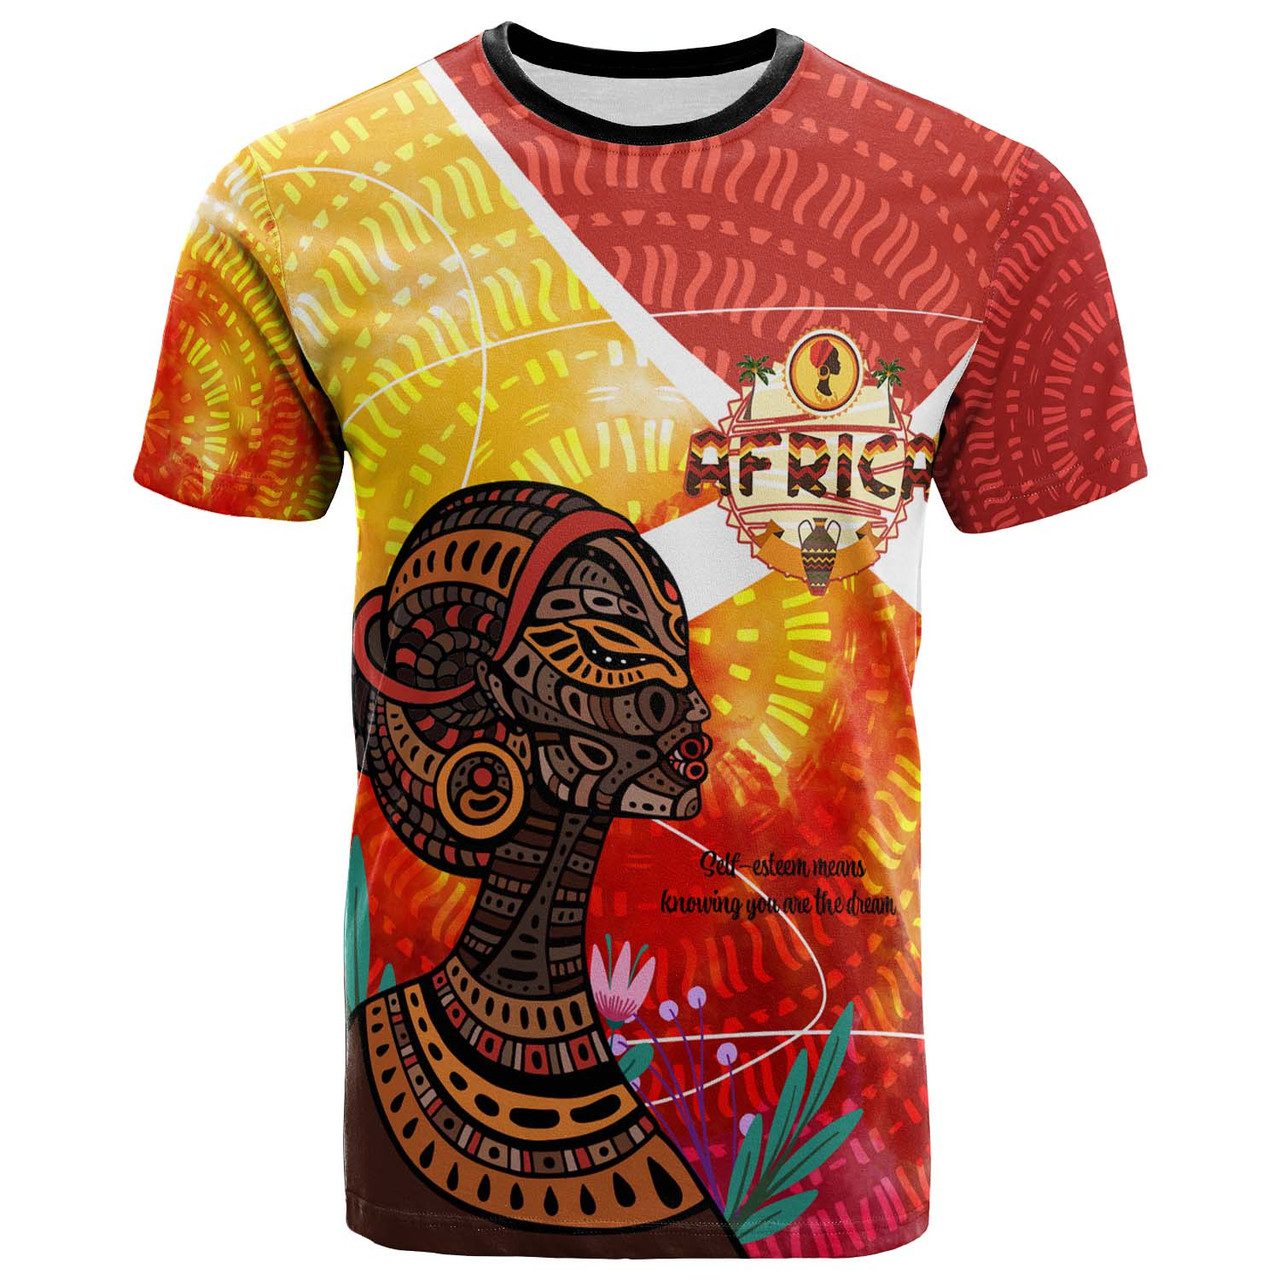 African T-shirt – Custom Celebrate Africa’s Woman’s Day Culture with African Girl T-shirt